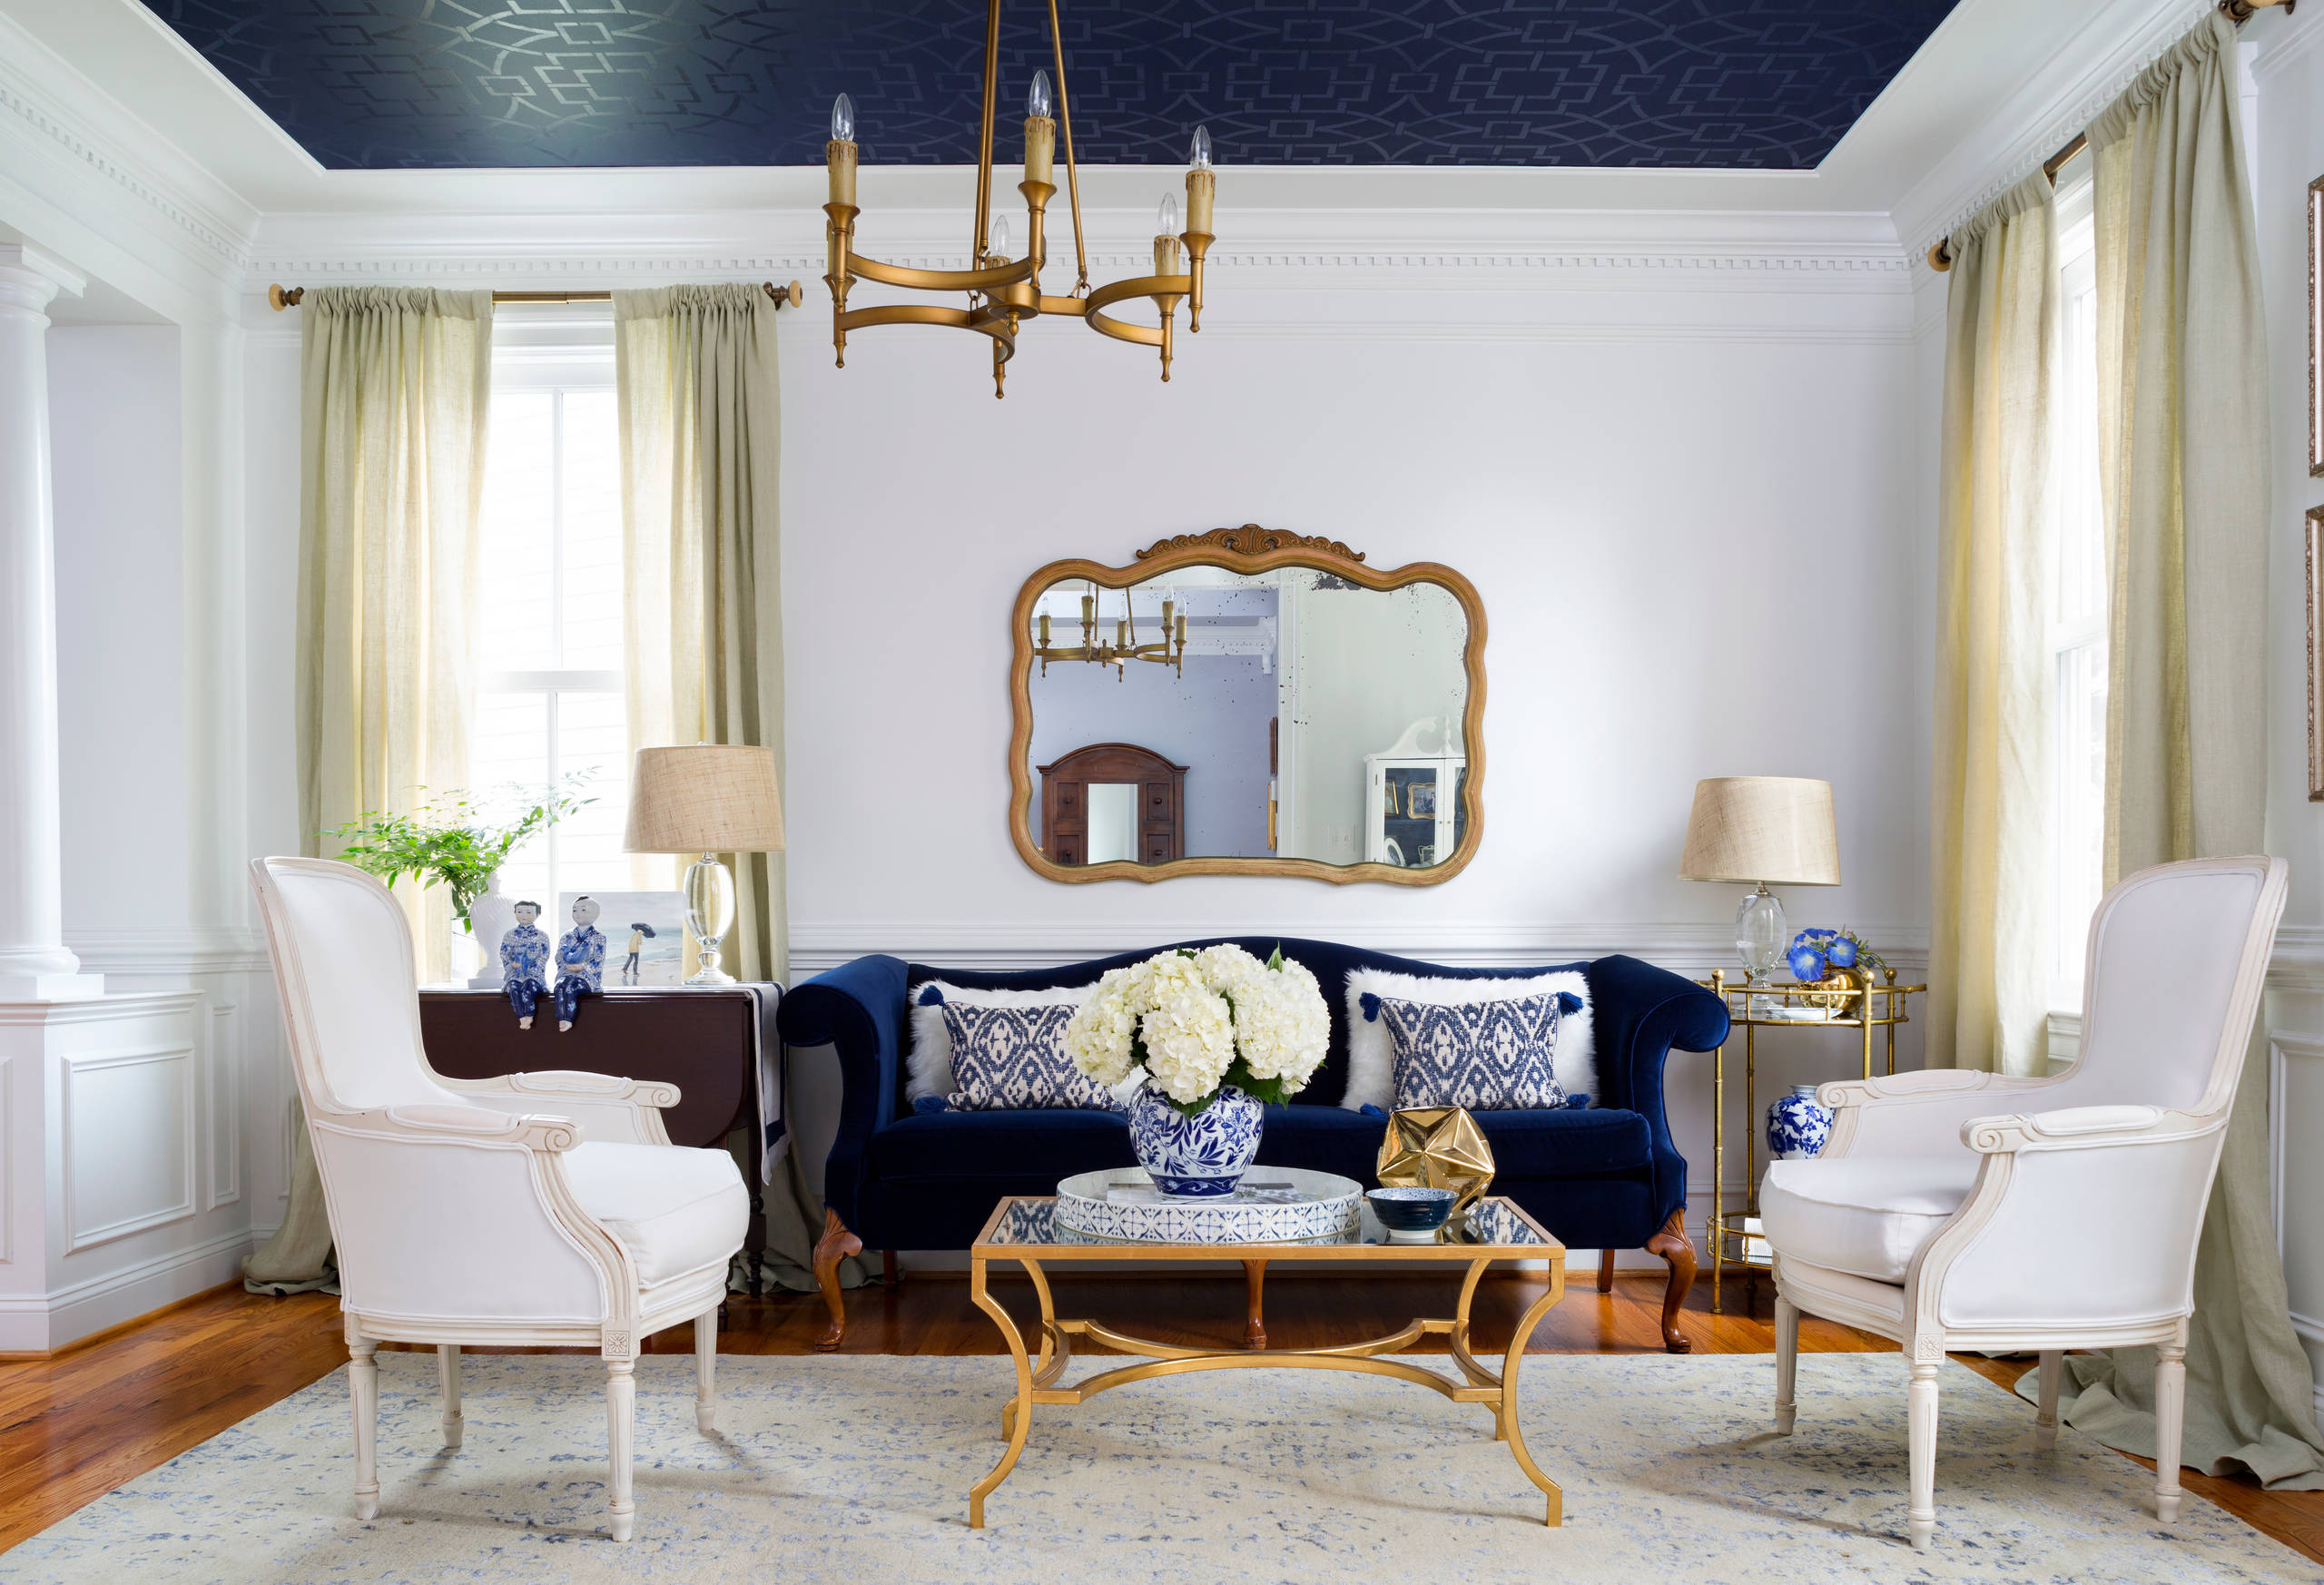 Navy Gold Living Room Ideas Photos, Navy Blue And White Living Room